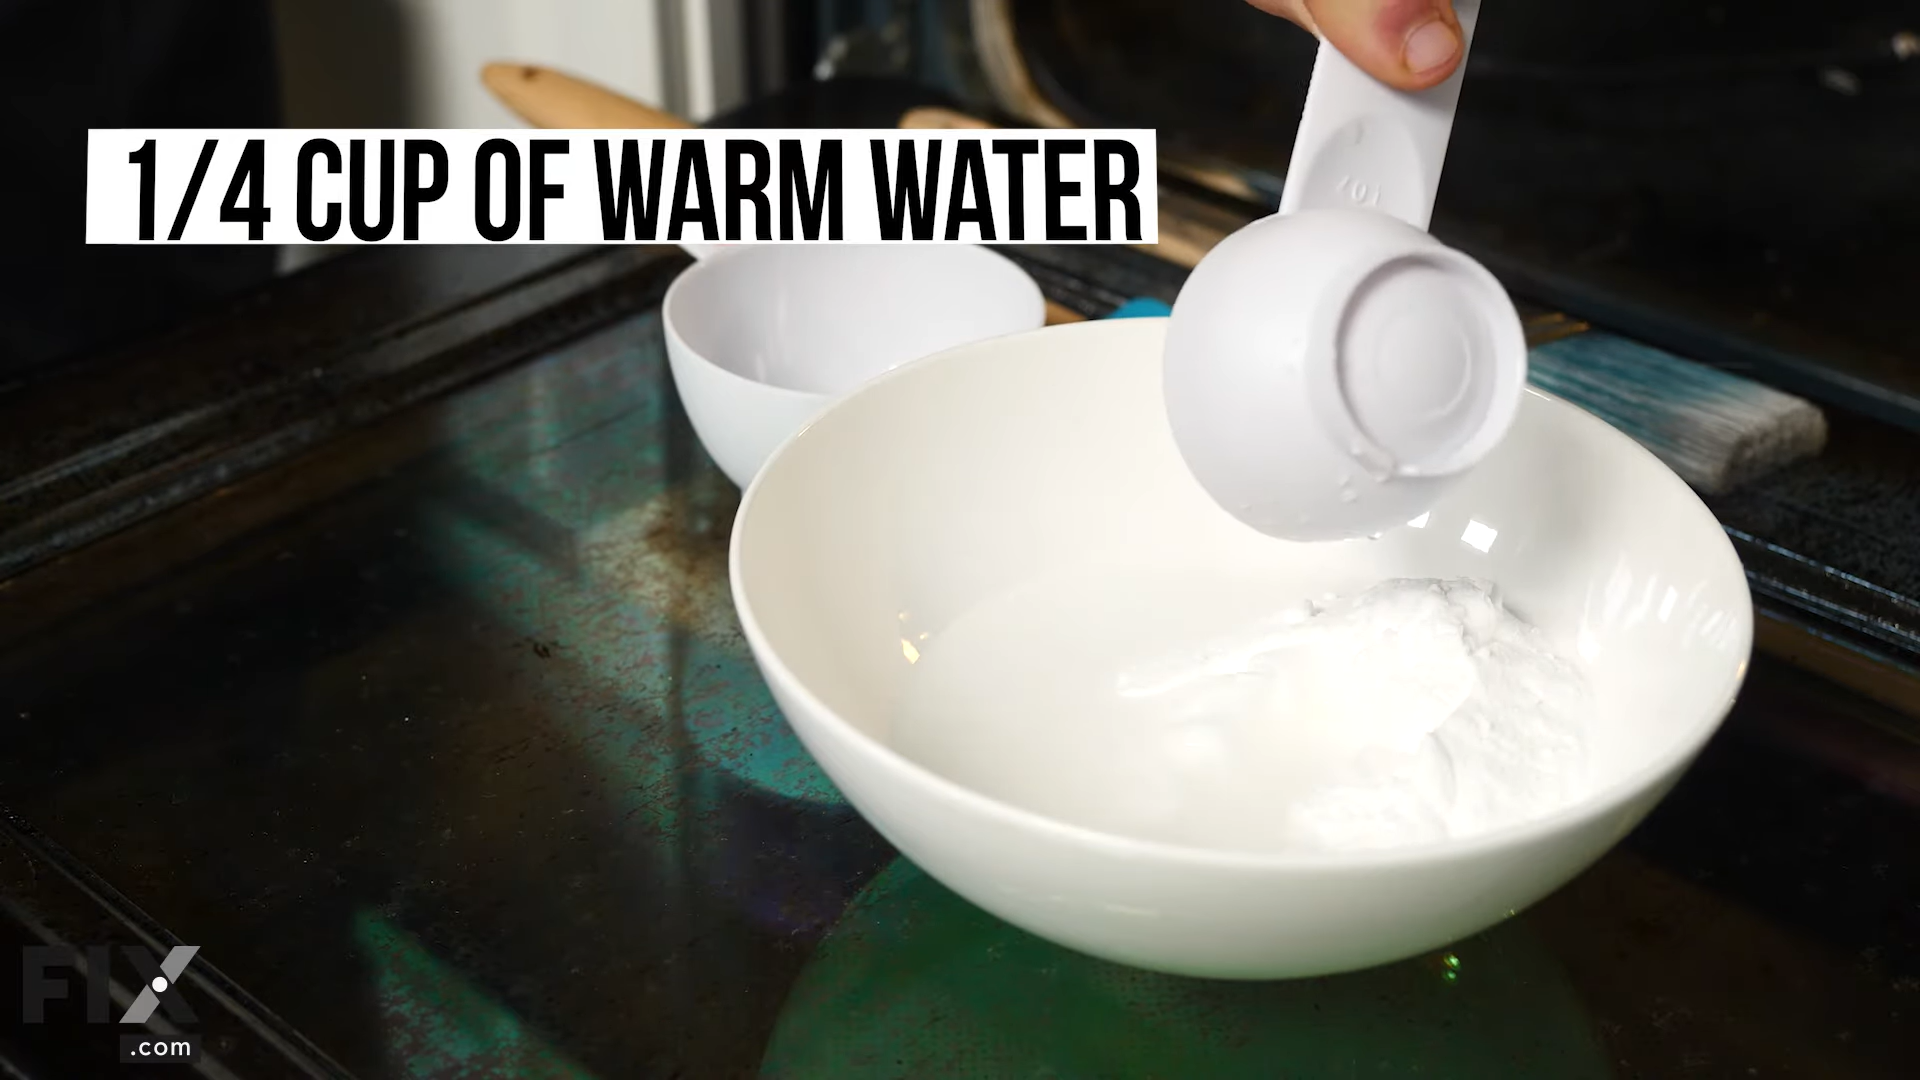 Homemade Cleaner Made from Water